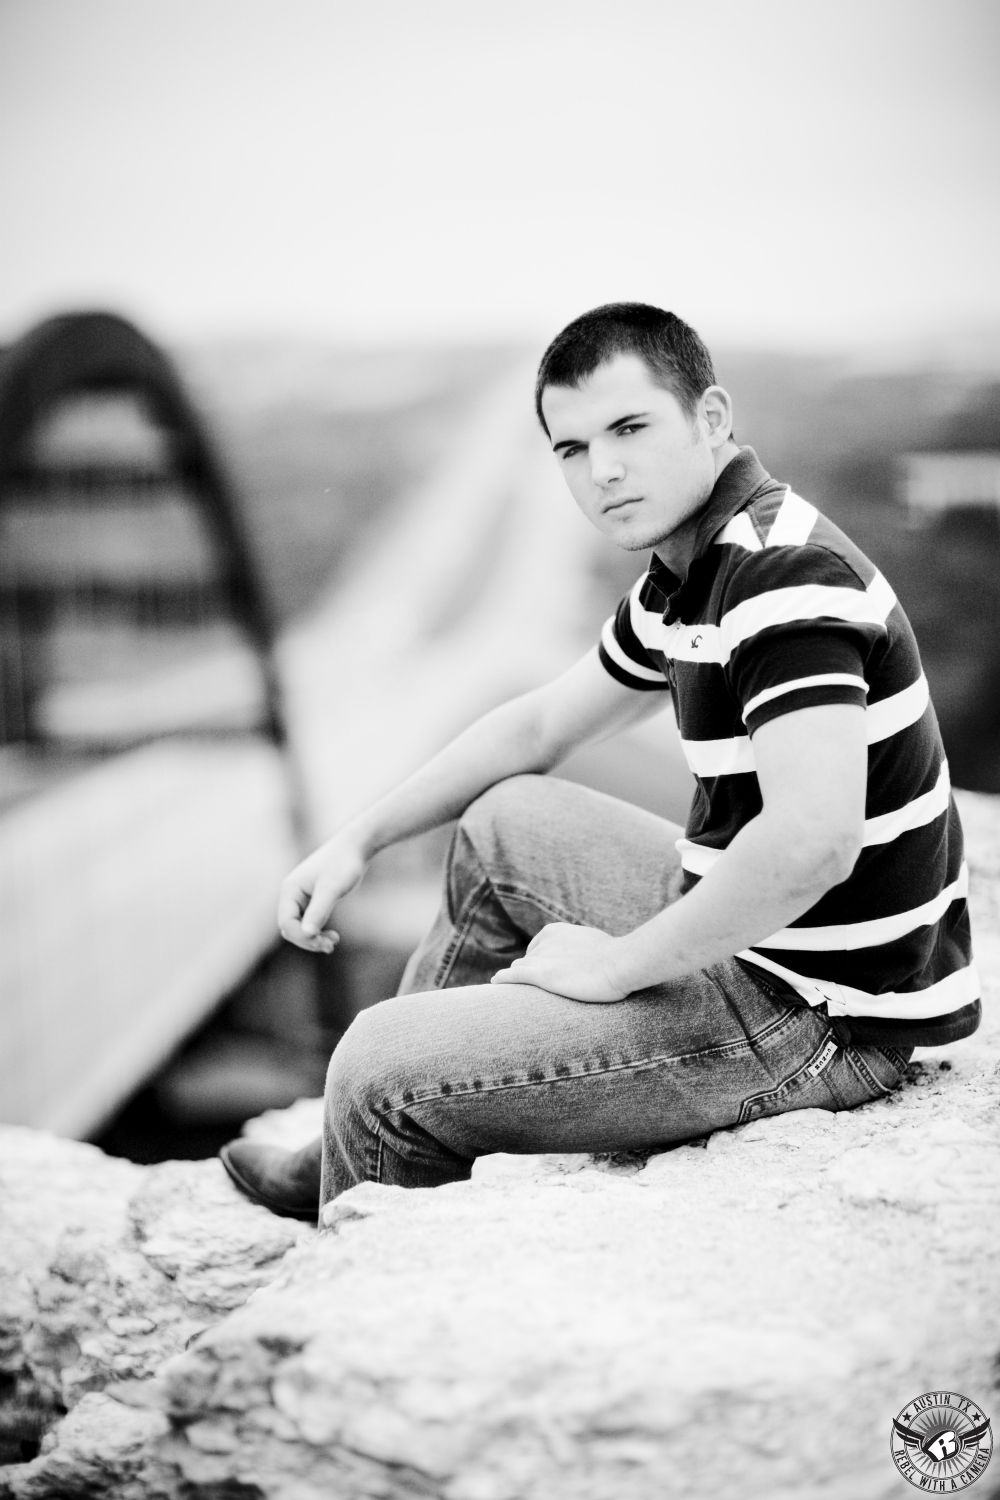 Pennybacker Bridge in Austin high school senior pictures of young man in jeans and striped shirt.